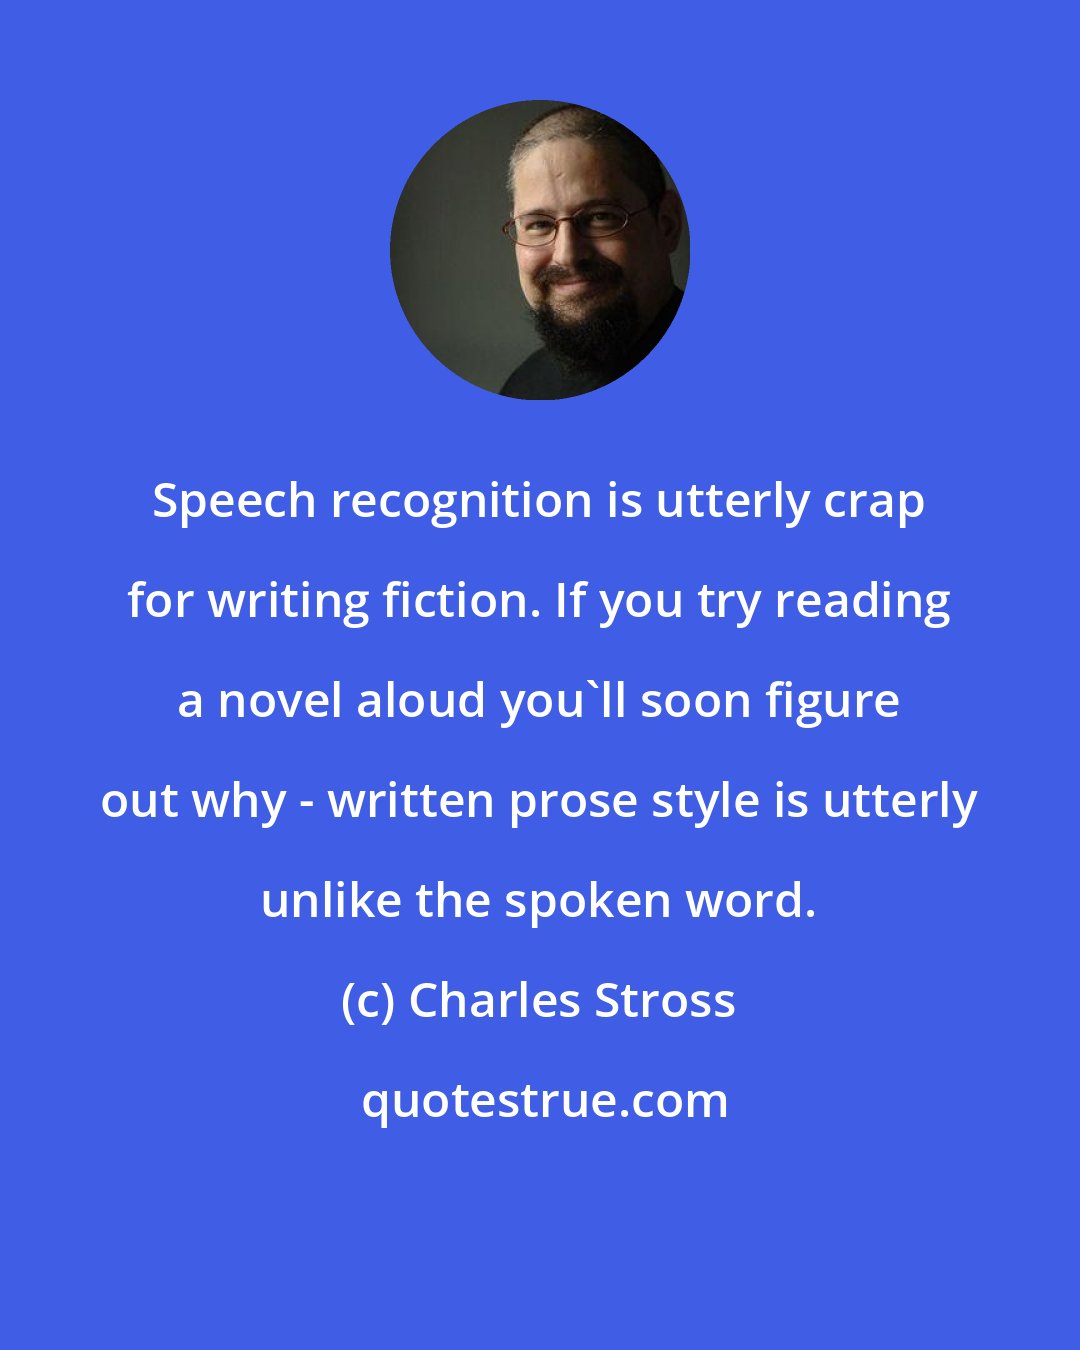 Charles Stross: Speech recognition is utterly crap for writing fiction. If you try reading a novel aloud you'll soon figure out why - written prose style is utterly unlike the spoken word.